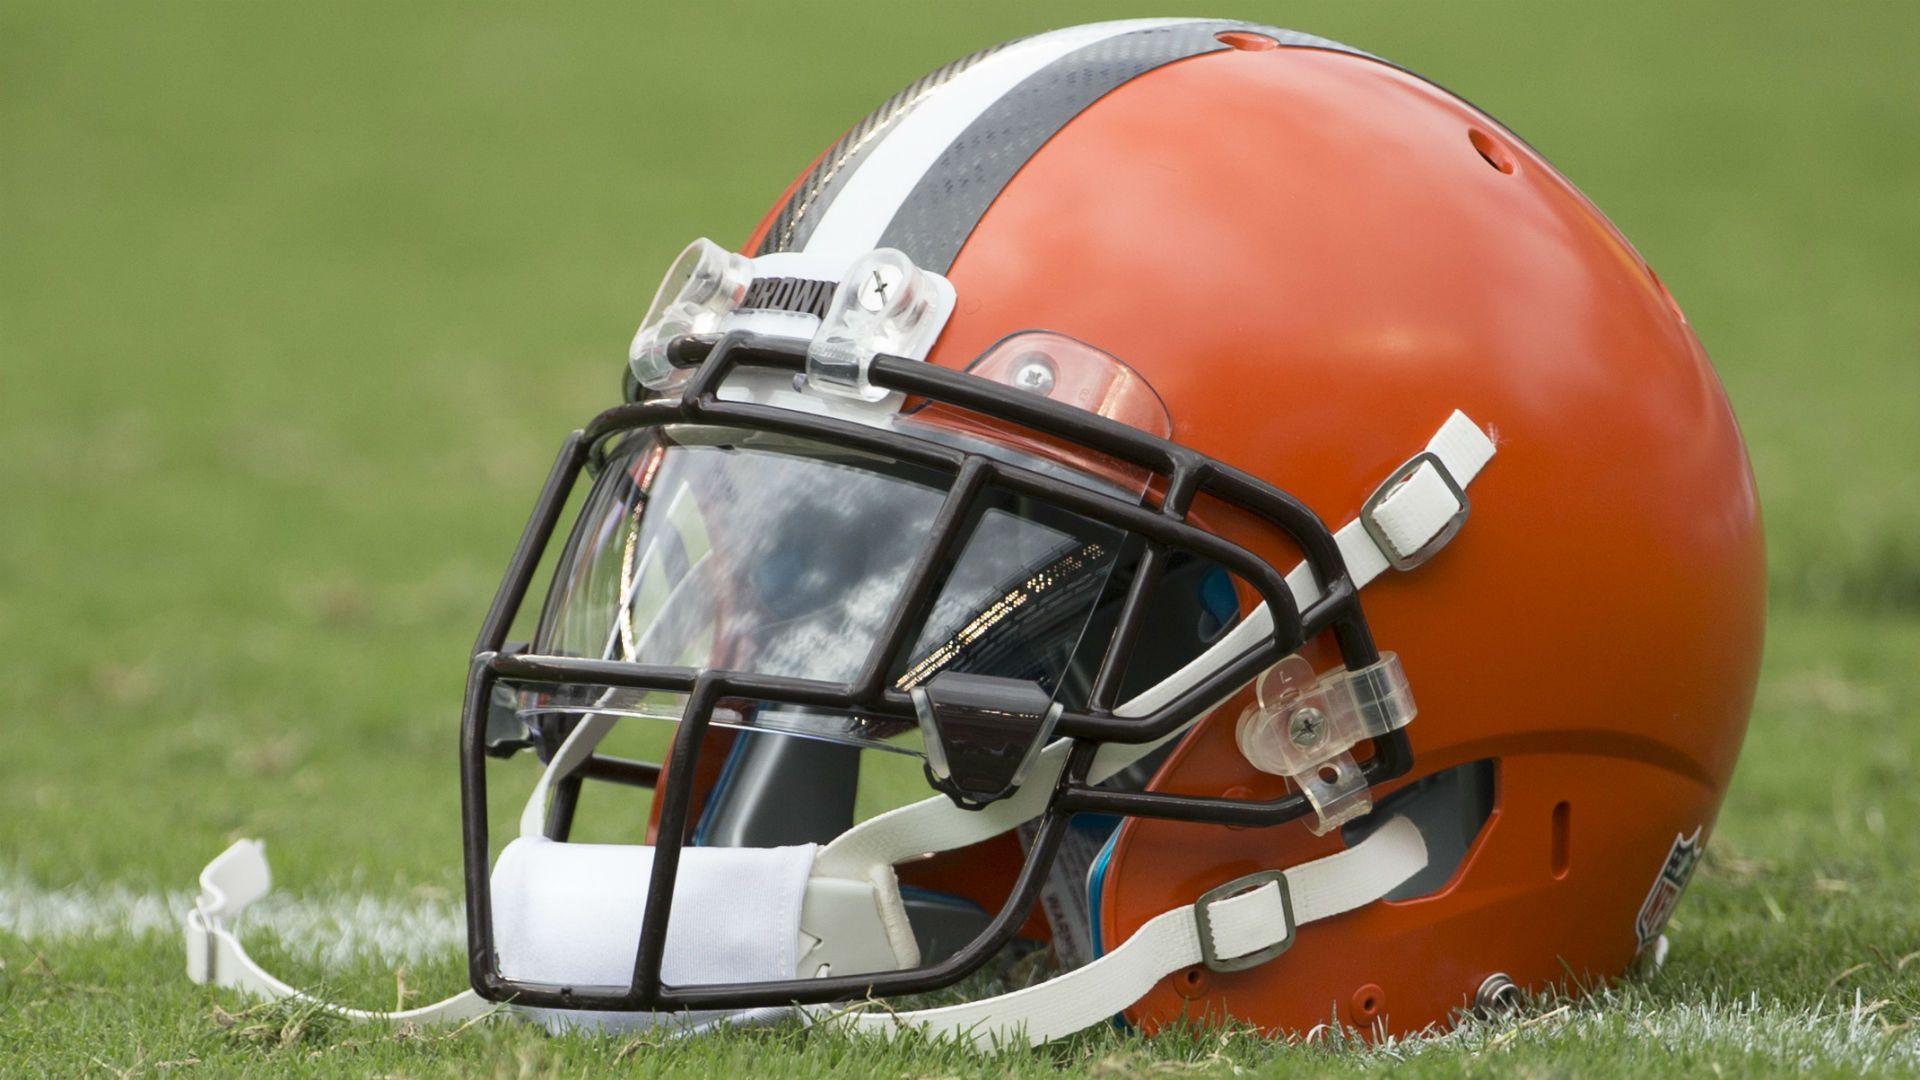 NFL Draft 2018: Browns GM says team hasn't received any 'legitimate